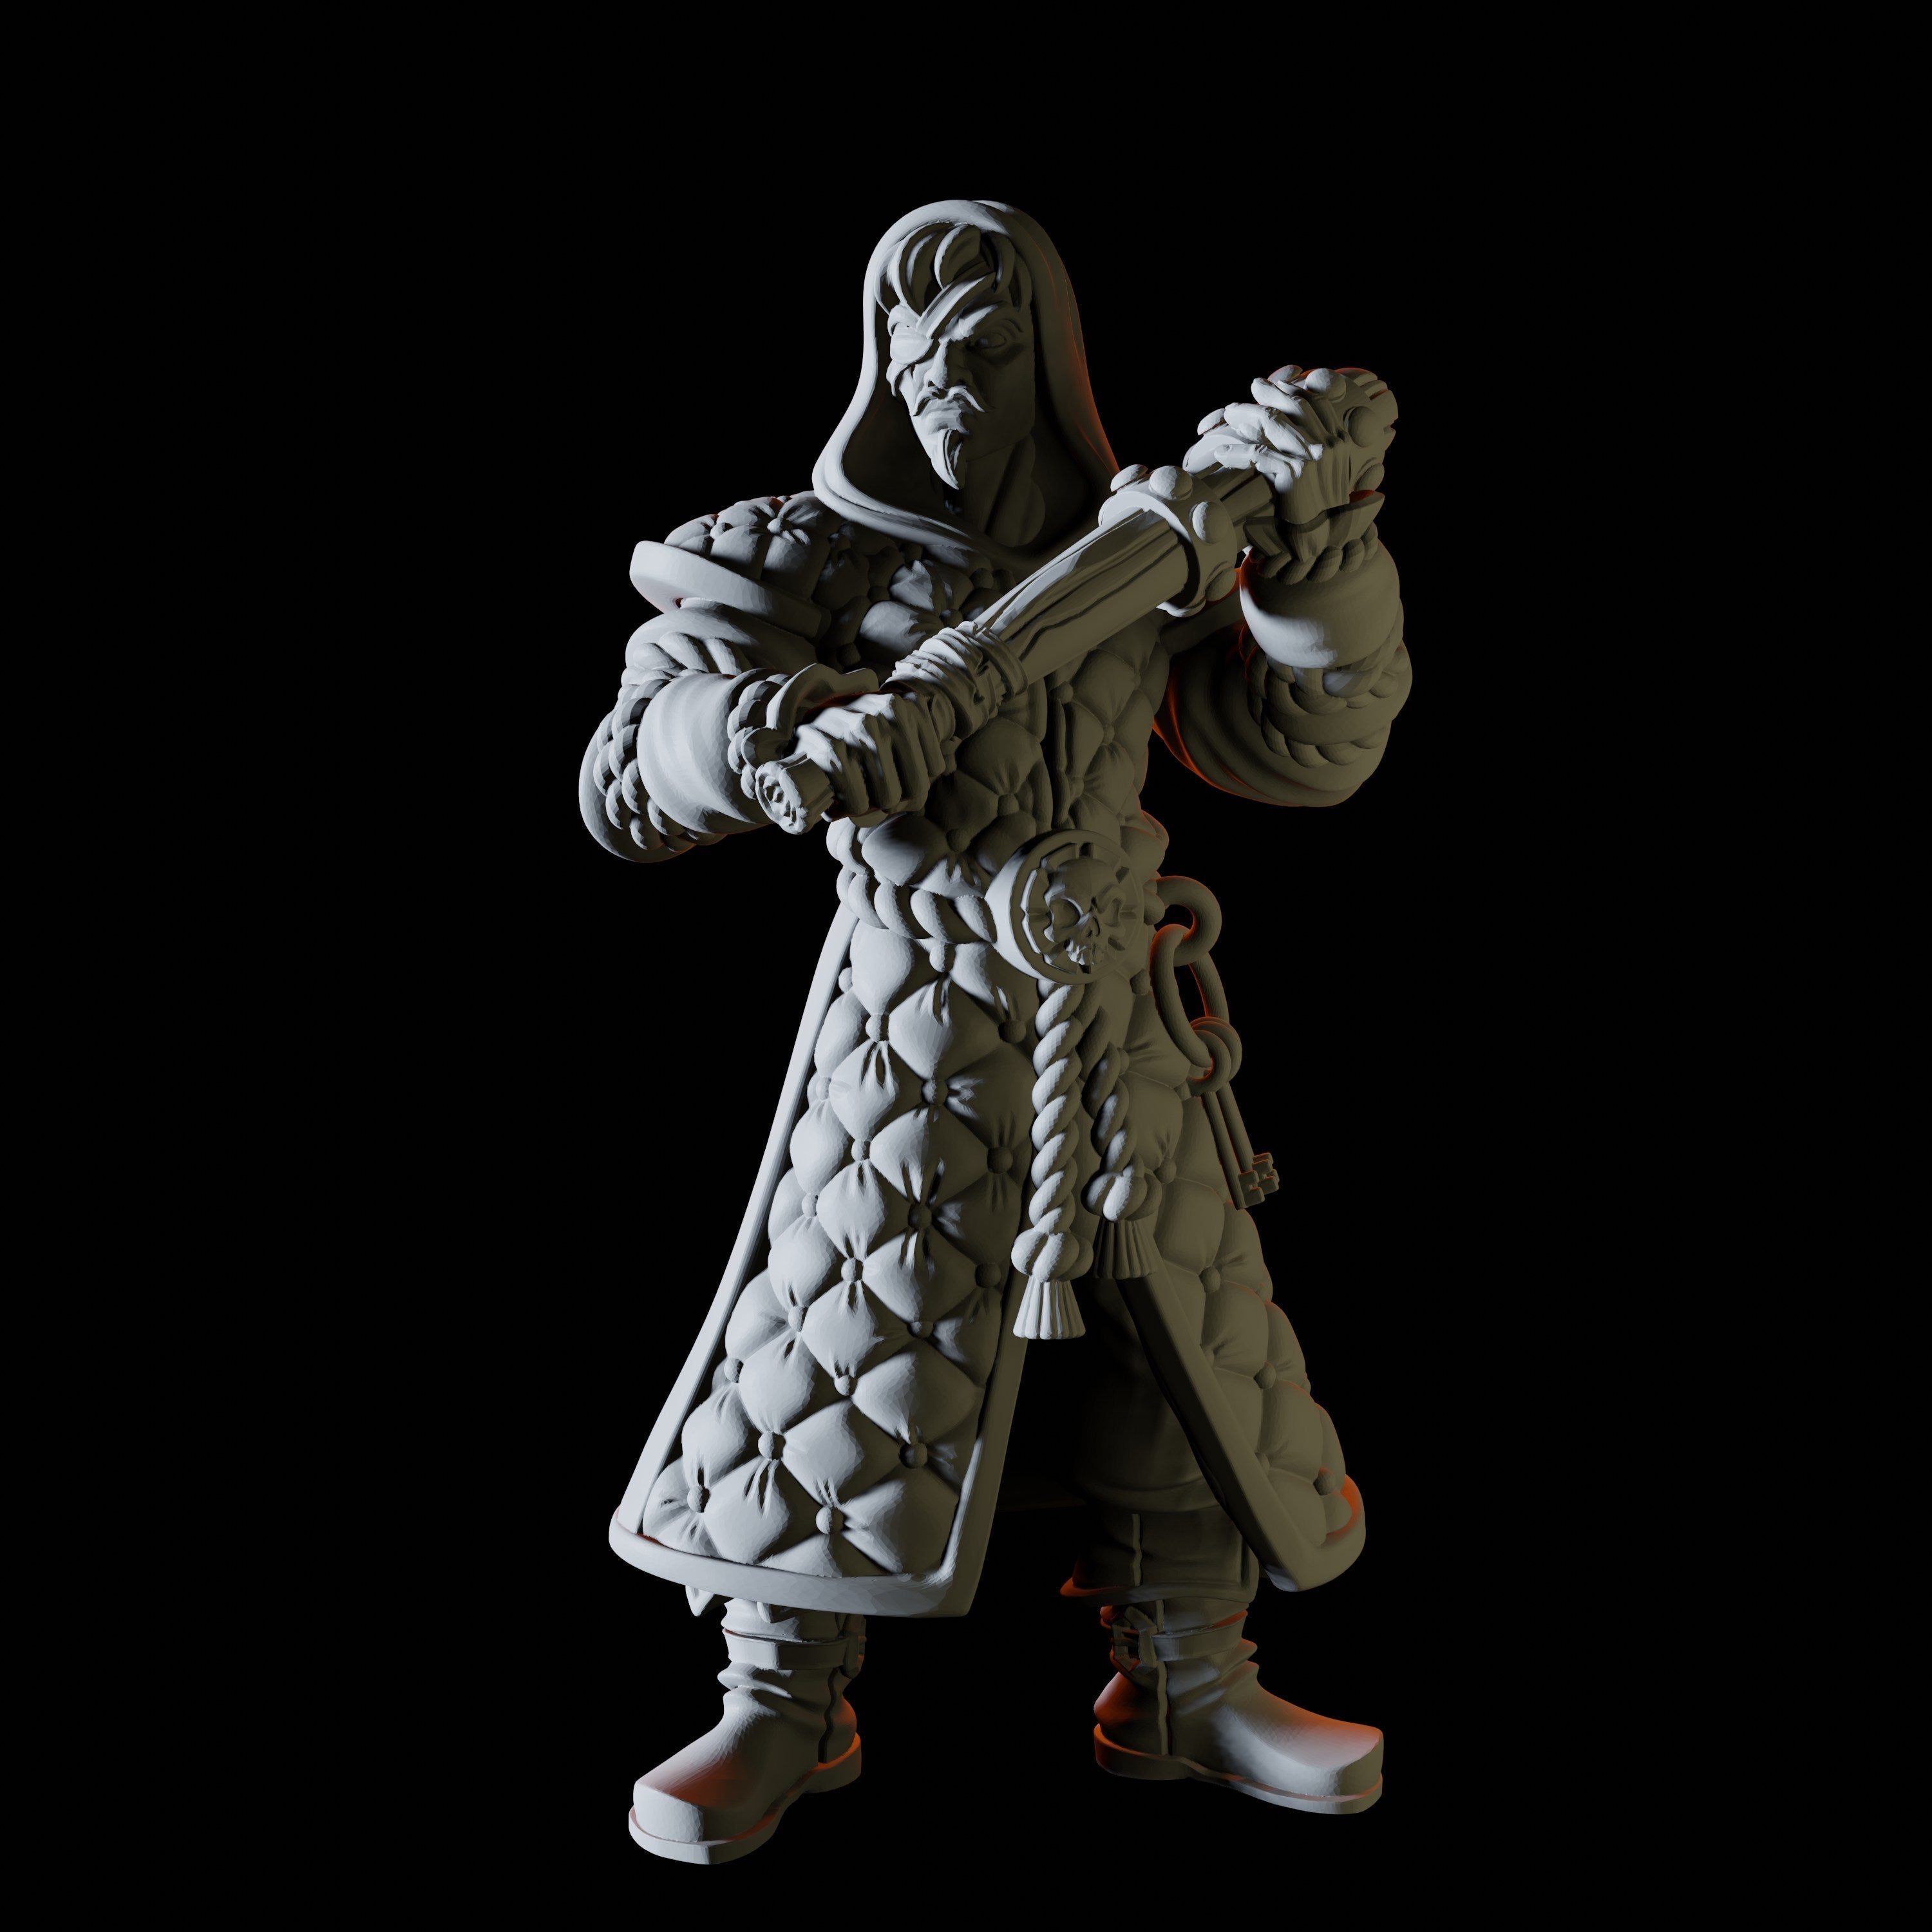 Two Prison Guard Miniatures for Dungeons and Dragons - Myth Forged